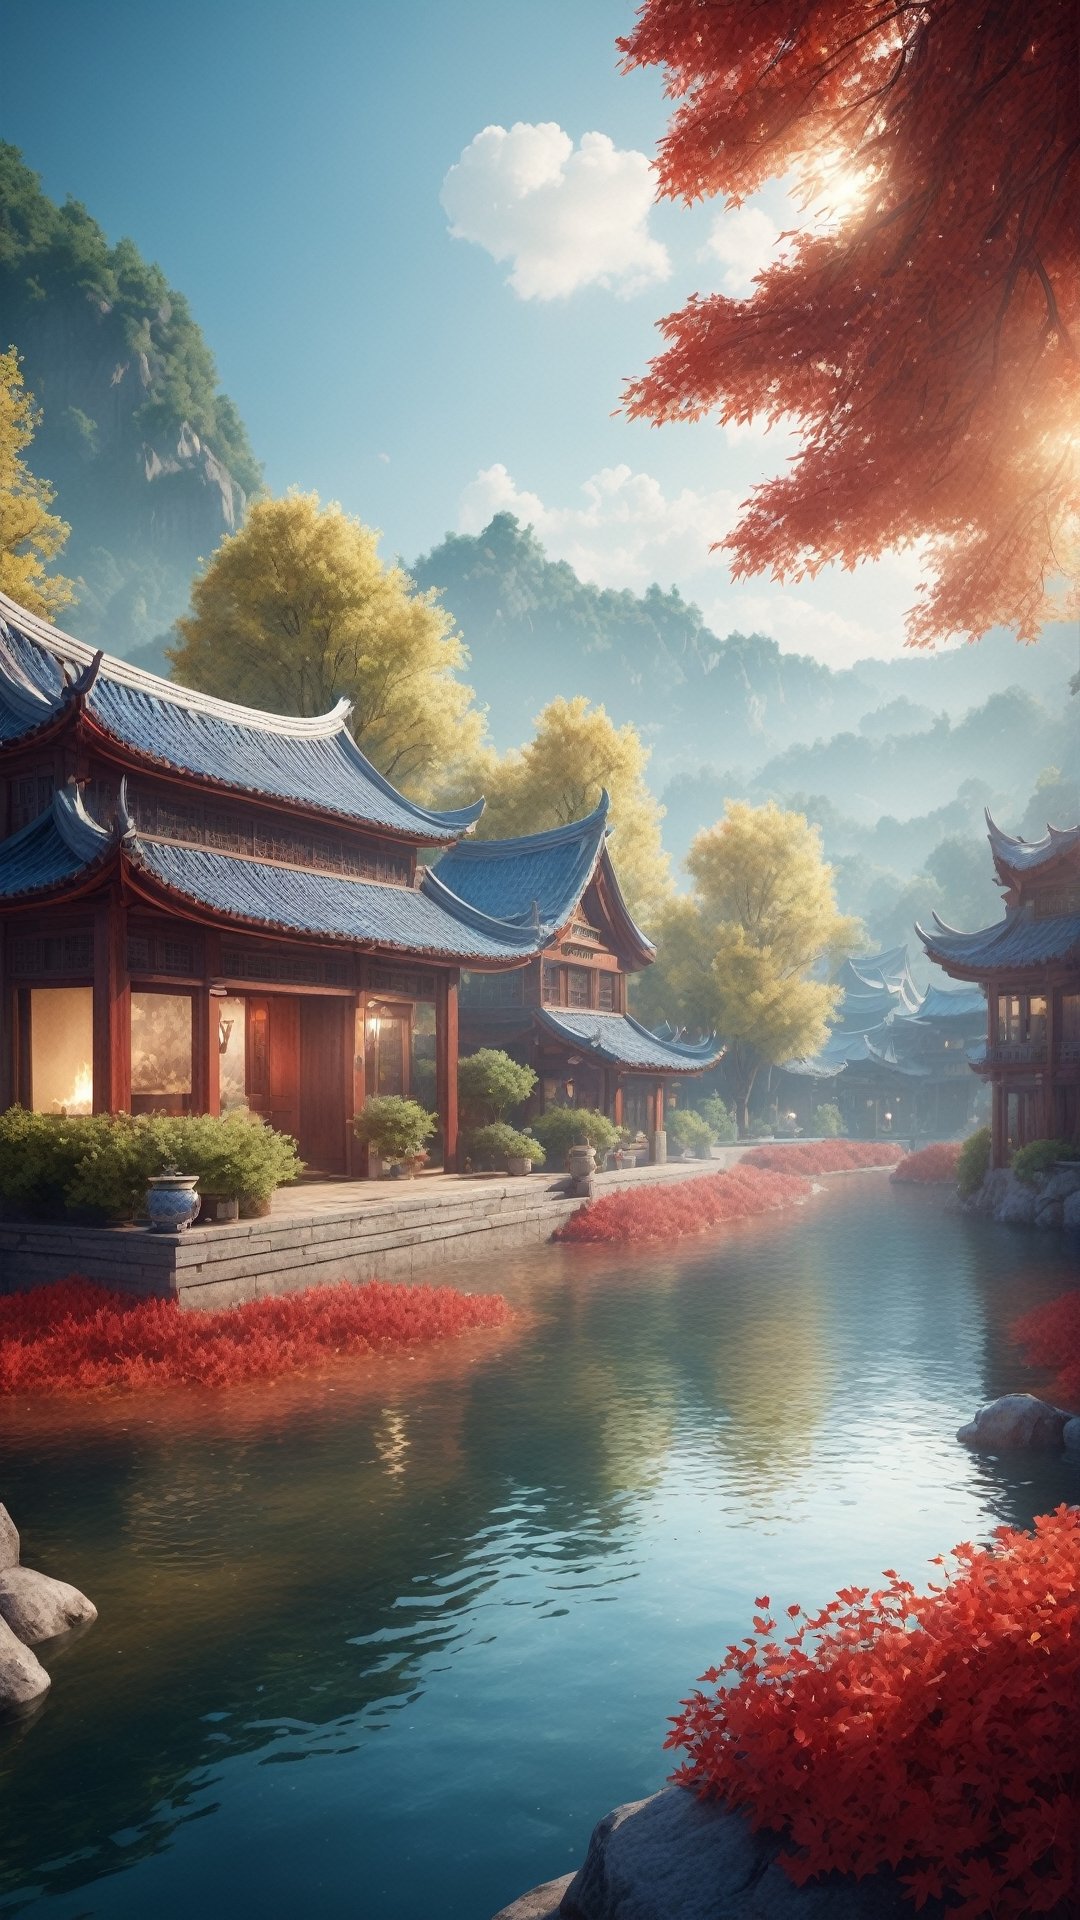 Masterpiece, best quality, (very detailed CG unified 8k wallpaper), (best quality), (best illustration), (best shadow), glowing elf with a glowing deer, drinking water in the pool, natural elements in forest theme. Mysterious forest, beautiful forest, nature, surrounded by flowers, delicate leaves and branches surrounded by fireflies (natural elements), (jungle theme), (leaves), (branches), (fireflies), (particle effects) and other 3D, Octane rendering, ray tracing, super detailed, alpine flowing water Xiaoqiao artistic conception beauty, there is a kind of sea and a hundred rivers with tolerance and great artistic conception, and landscape painting of Jiangnan water town. Red atmosphere, maple leaves, autumn, artistic conception, red lotus, lotus pond moonlight, autumn, pond --auto --s2